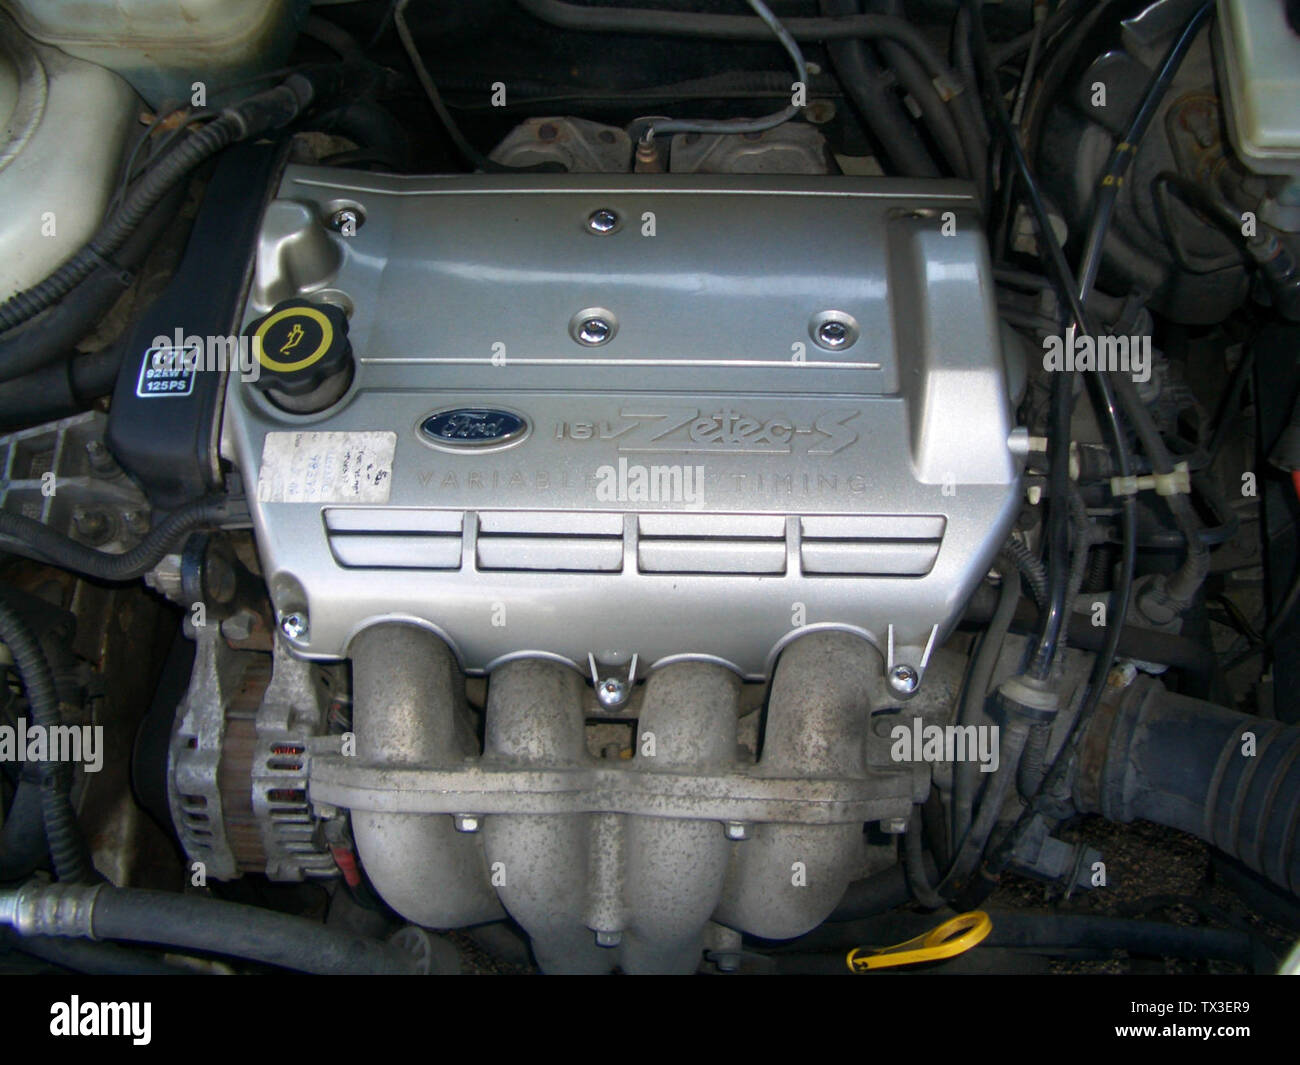 1.7L Ford Zetec-S VCT engine in a Ford Puma.; 29 August 2007 (original  upload date); Transfered from en.pedia; Original uploader was Asestar at  en.pedia Stock Photo - Alamy